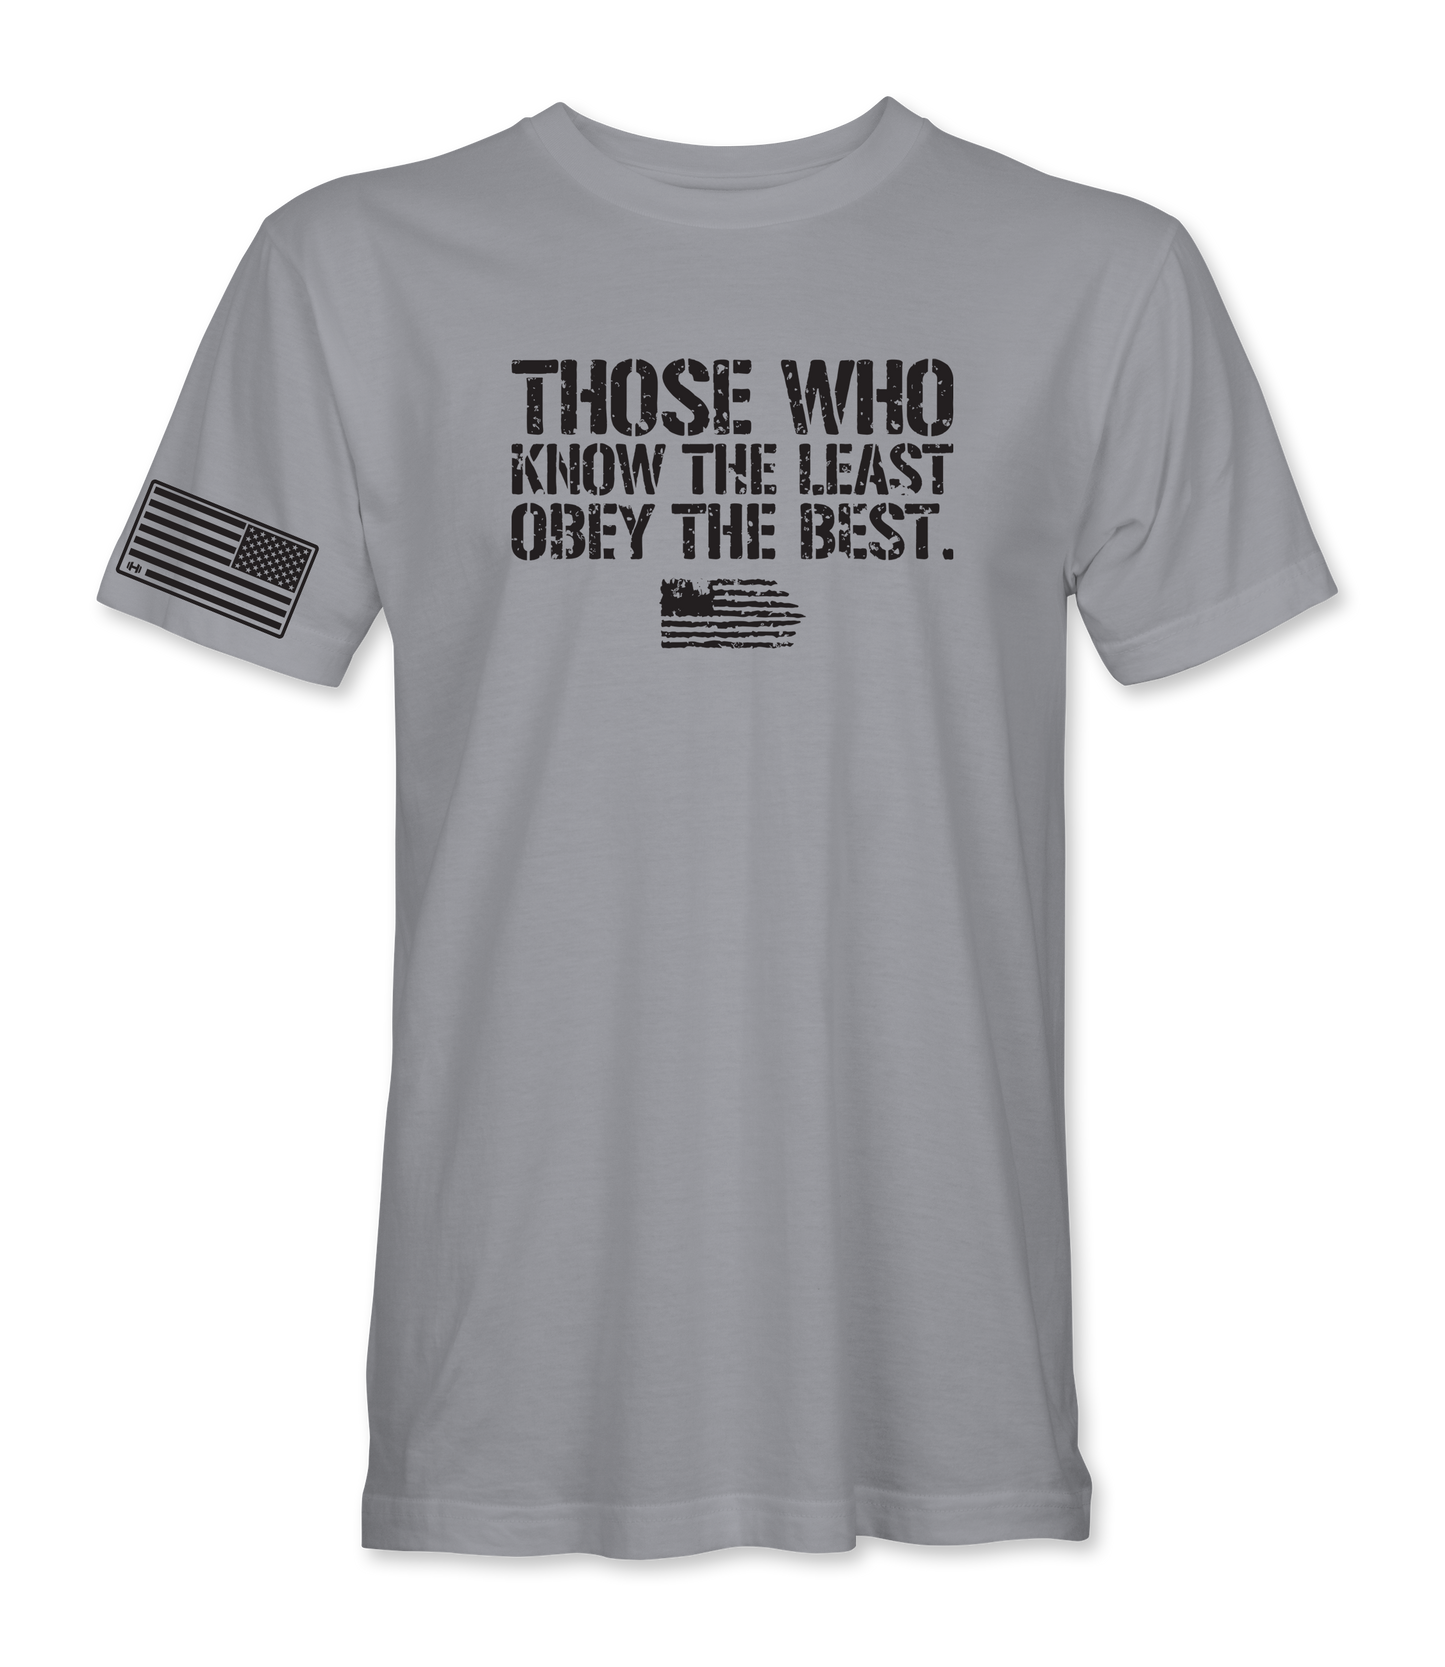 Those Who Know The Least Obey the Best T-Shirt